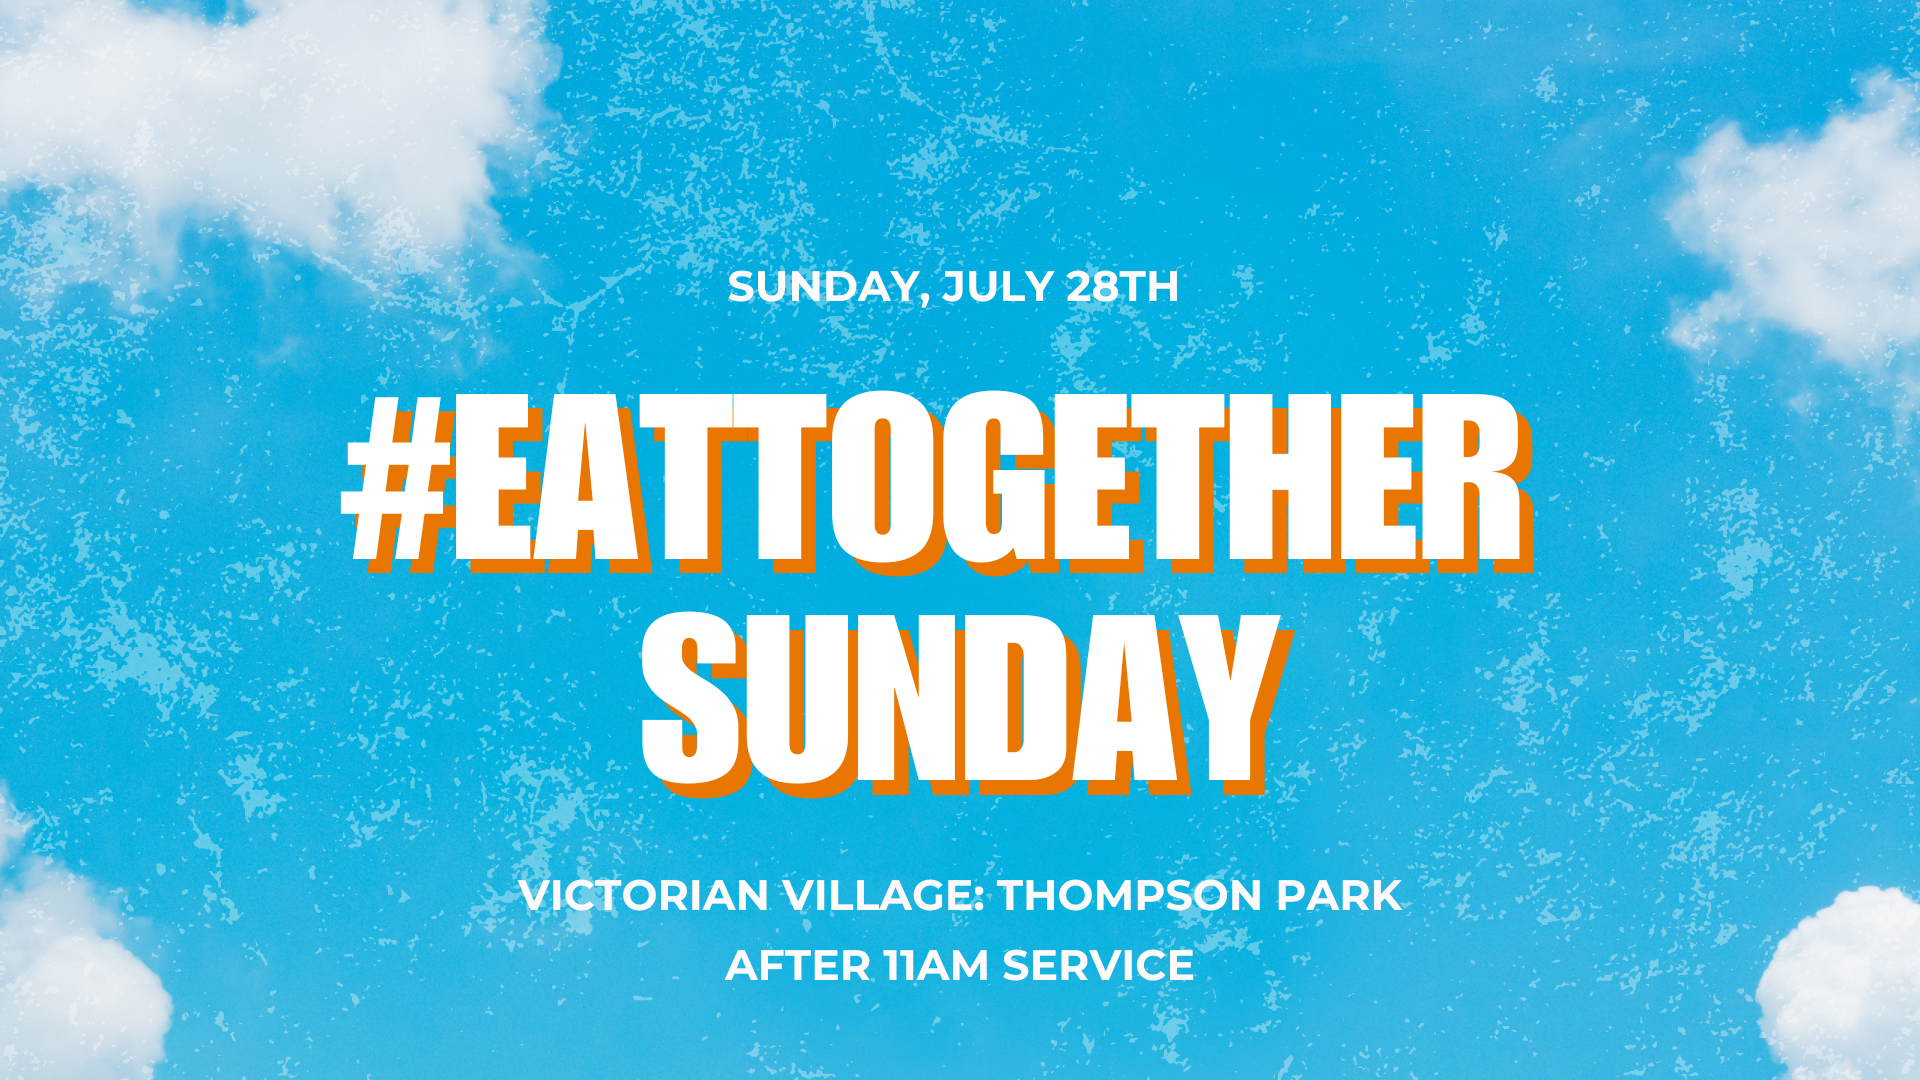 Featured image for Victorian Village #eattogether Sunday!